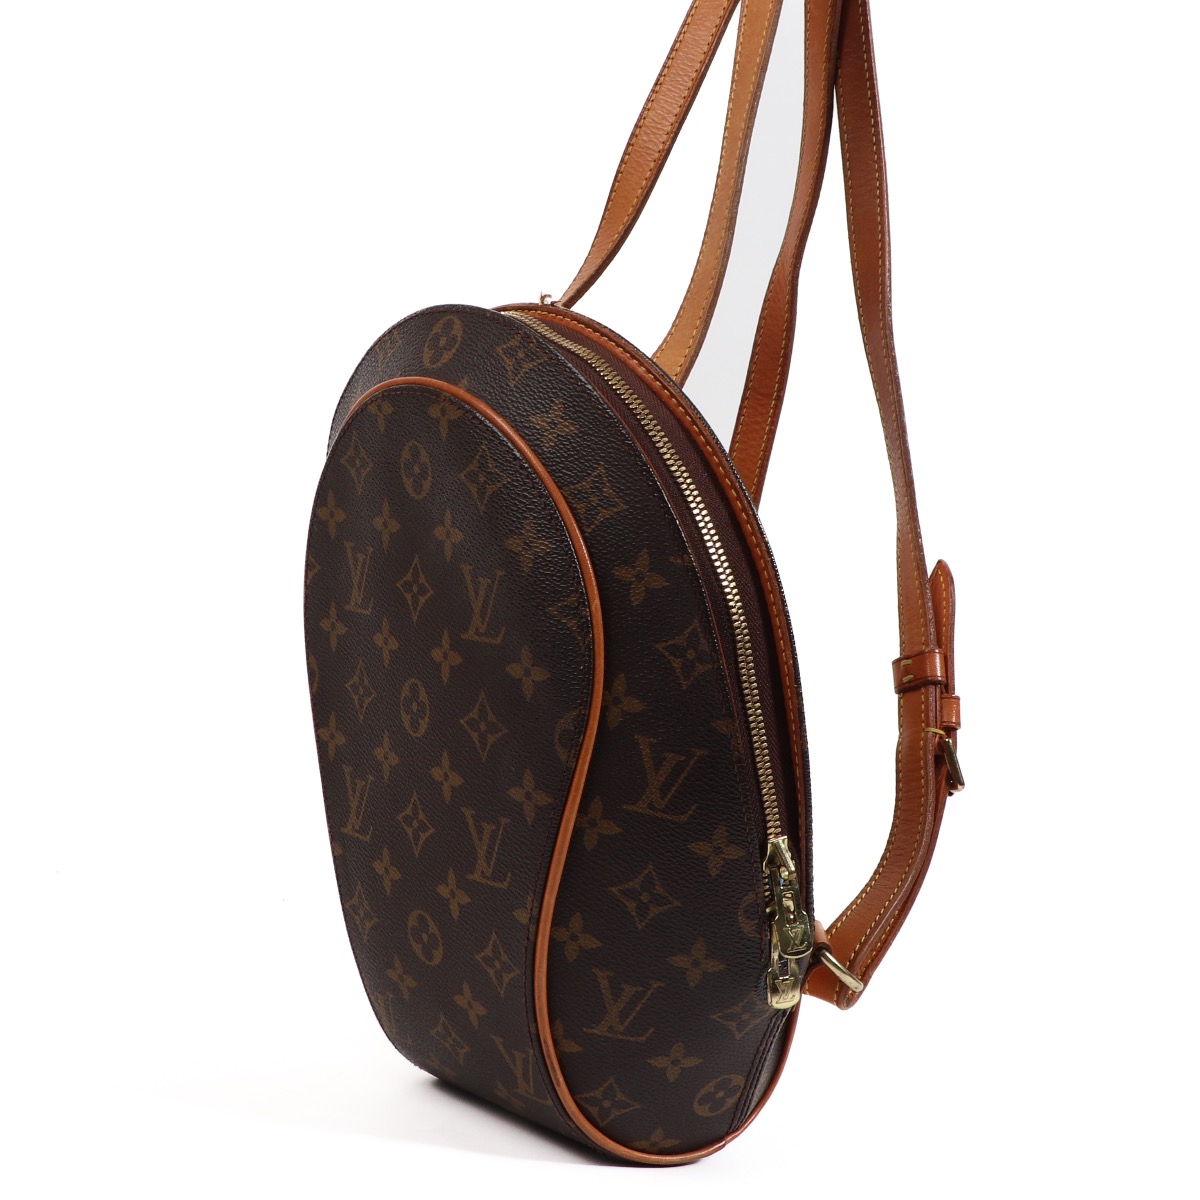 Louis Vuitton Ellipse Backpack - The Recollective